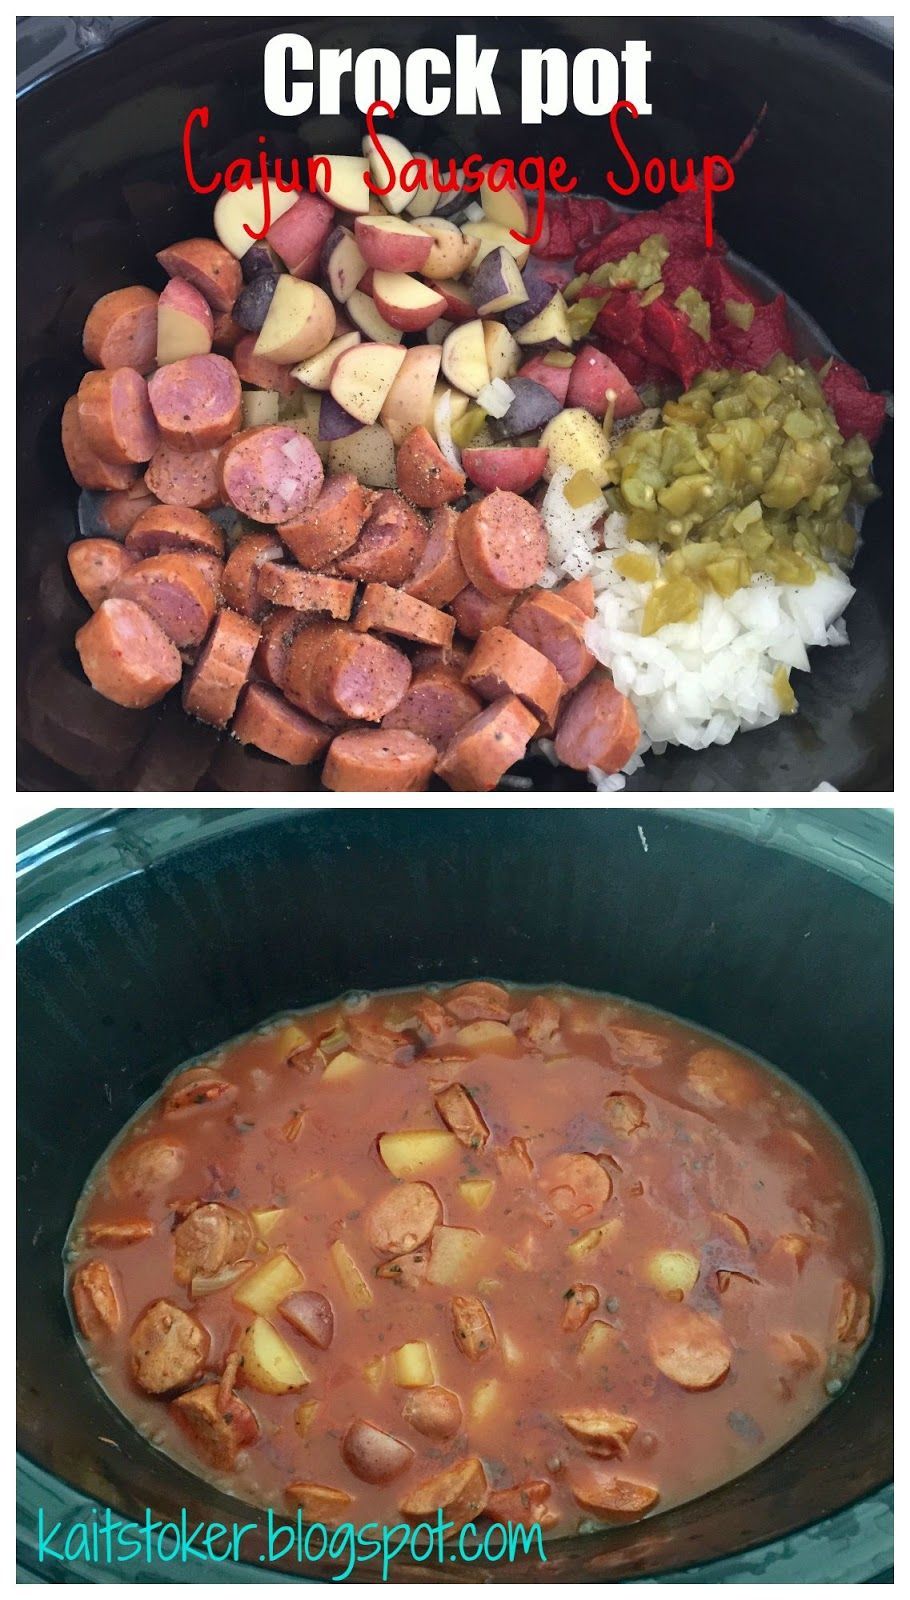 21 Day Fix approved, food that helps you lose! For Me: Crockpot Cajun Sausage Soup